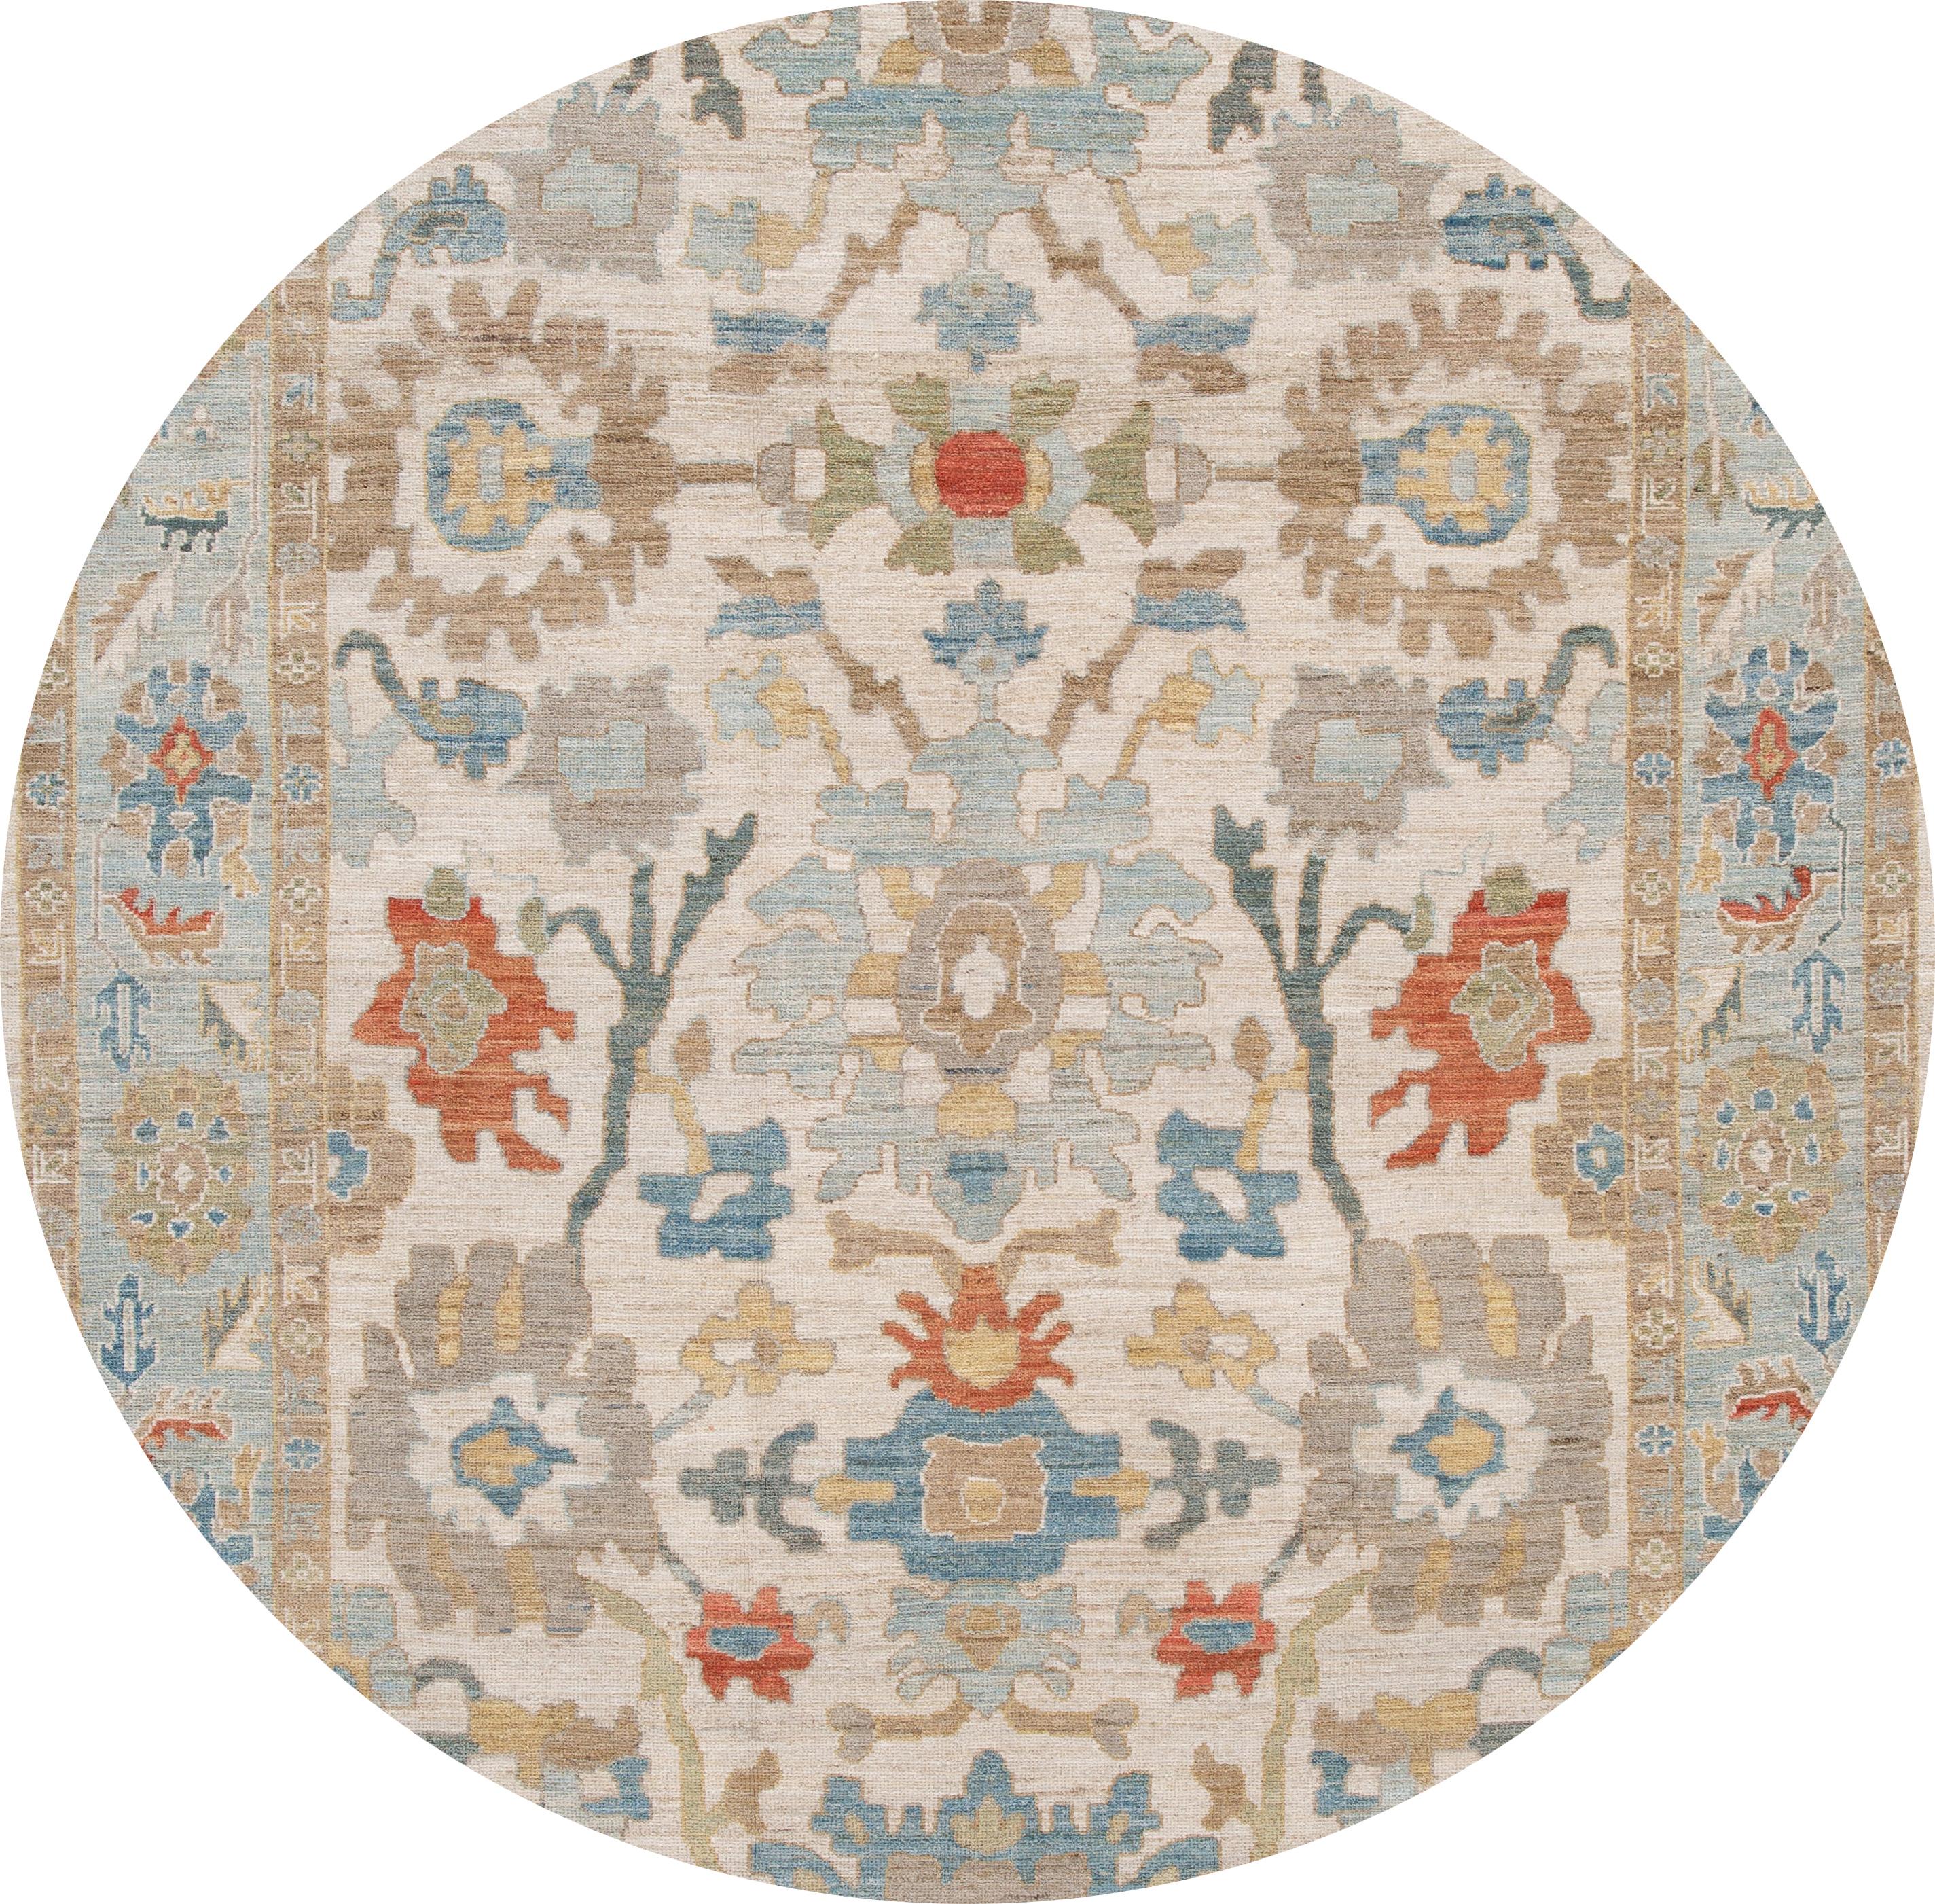 Beautiful contemporary Sultanabad rug, hand knotted wool with an ivory field, light blue frame, tan, rust and blue accents in all-over Classic floral design.
This rug measures: 8'1